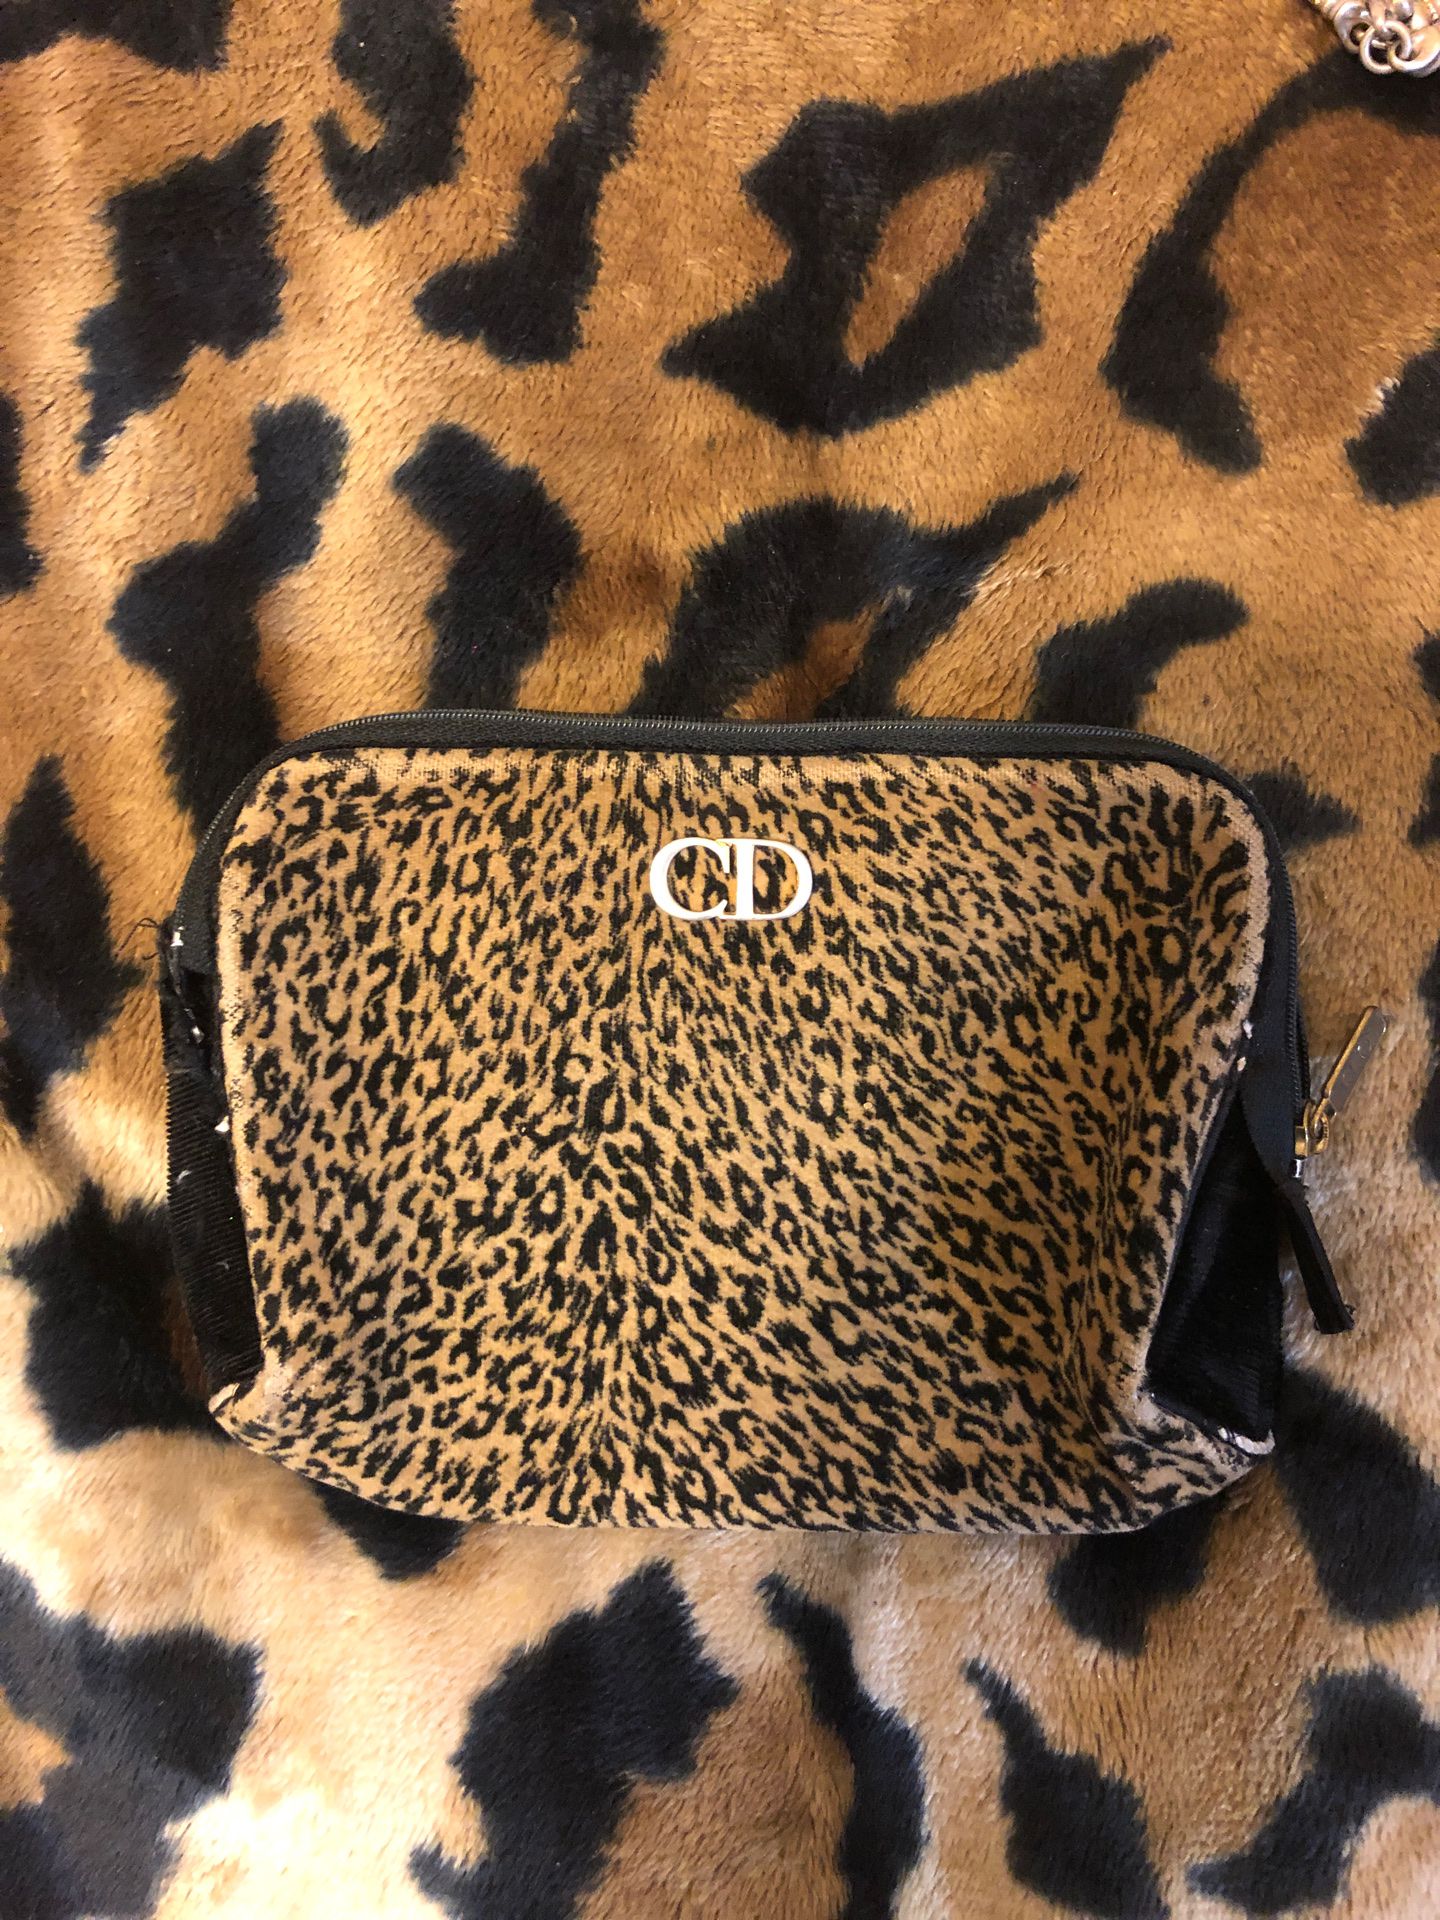 Extremely Well Used Christian Dior Cheetah or Jaguar 🐆 Print Makeup 💄 Case.